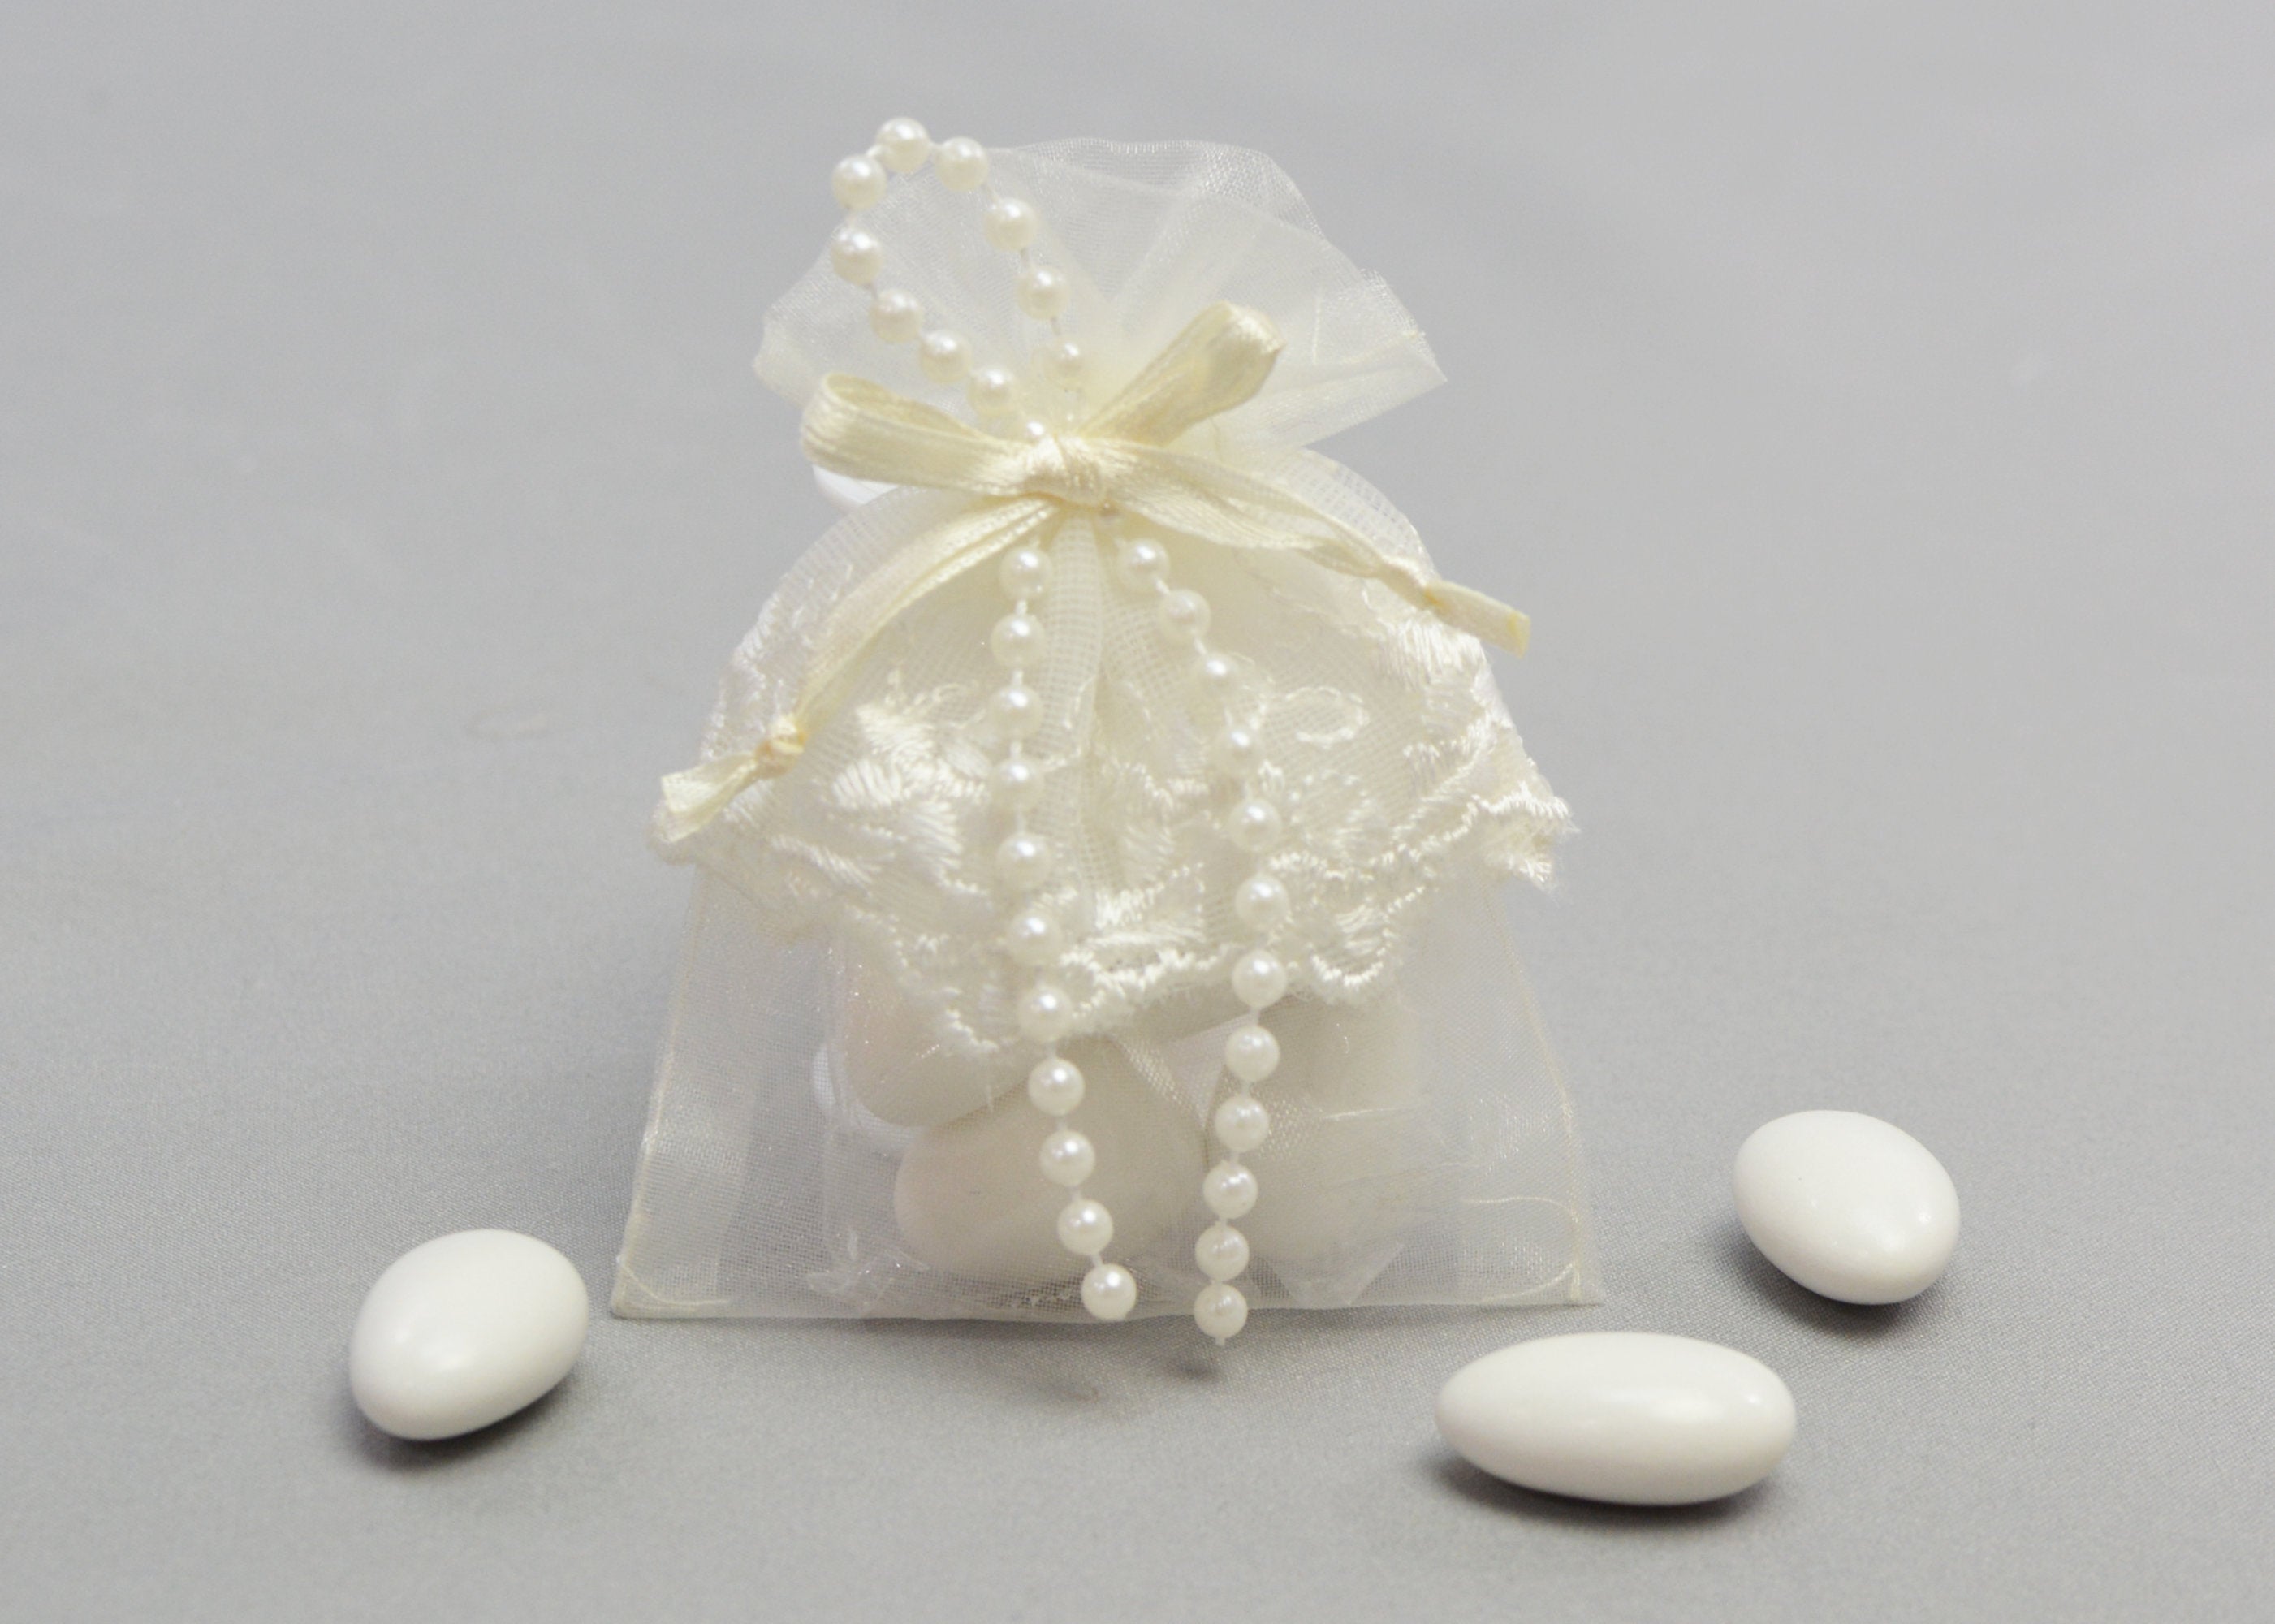 40 Ivory Wedding Welcome Bags With Satin Ribbon Handles and 